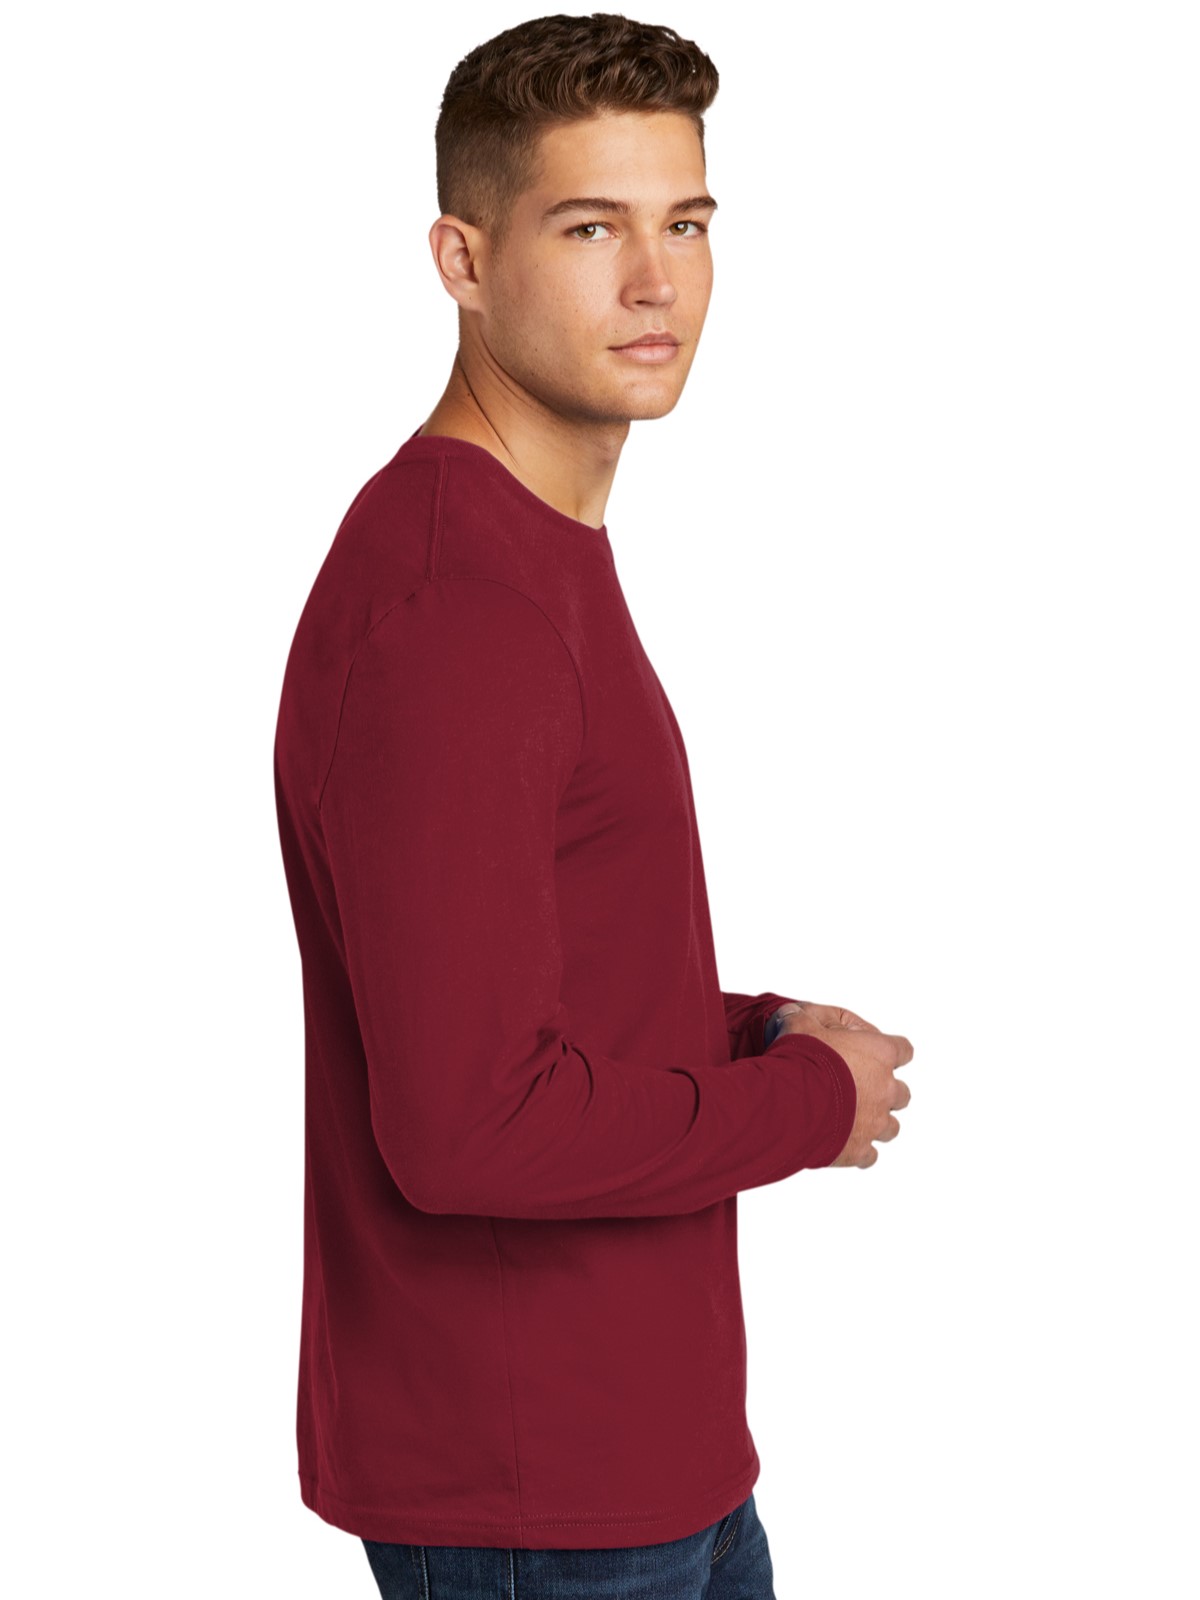 NL3601 Next Level Premium Fitted Long Sleeve Crew Tee